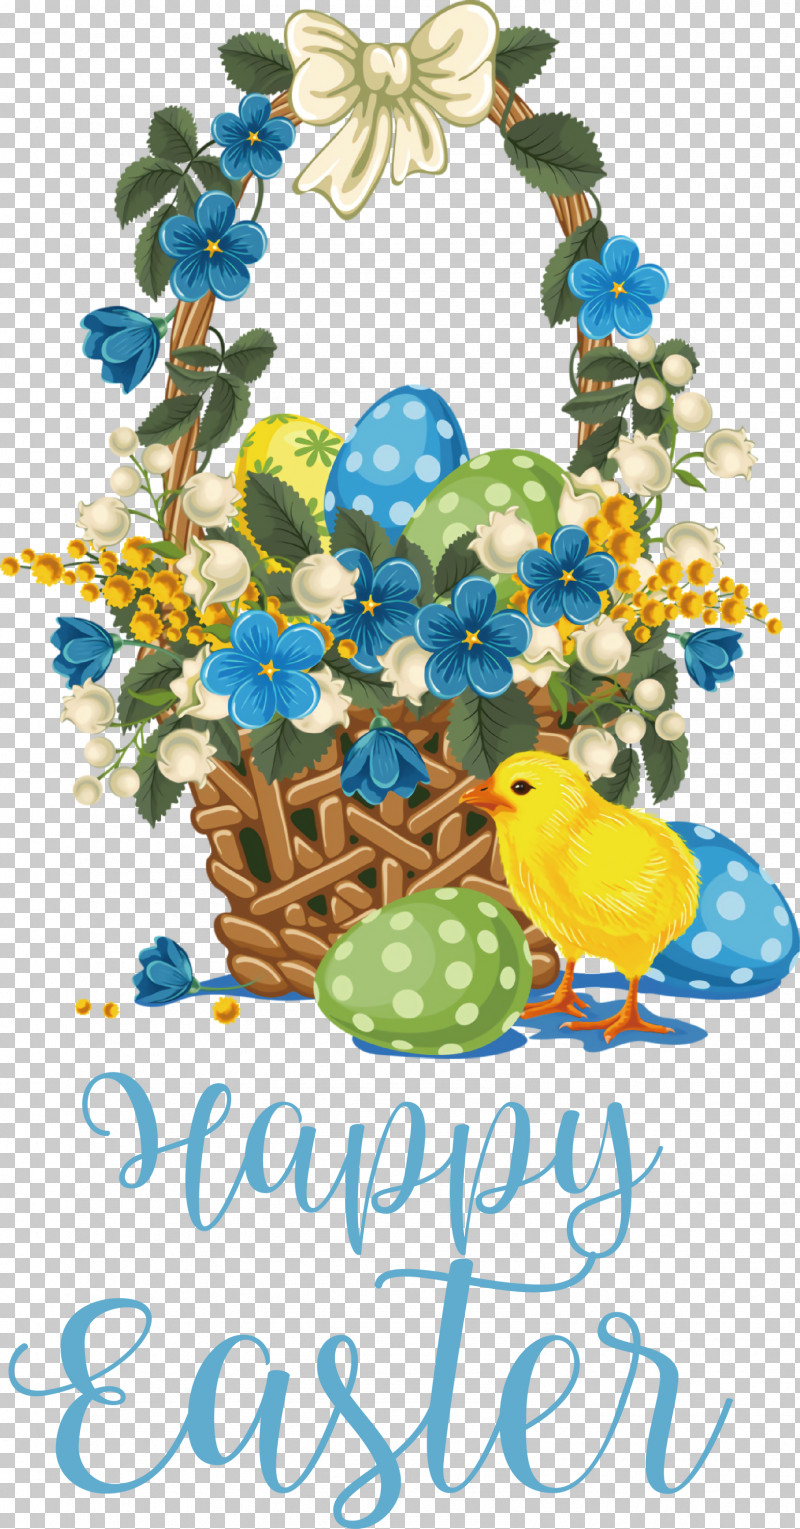 Happy Easter Chicken And Ducklings PNG, Clipart, Basket, Chicken And Ducklings, Easter Basket, Easter Bunny, Easter Egg Free PNG Download